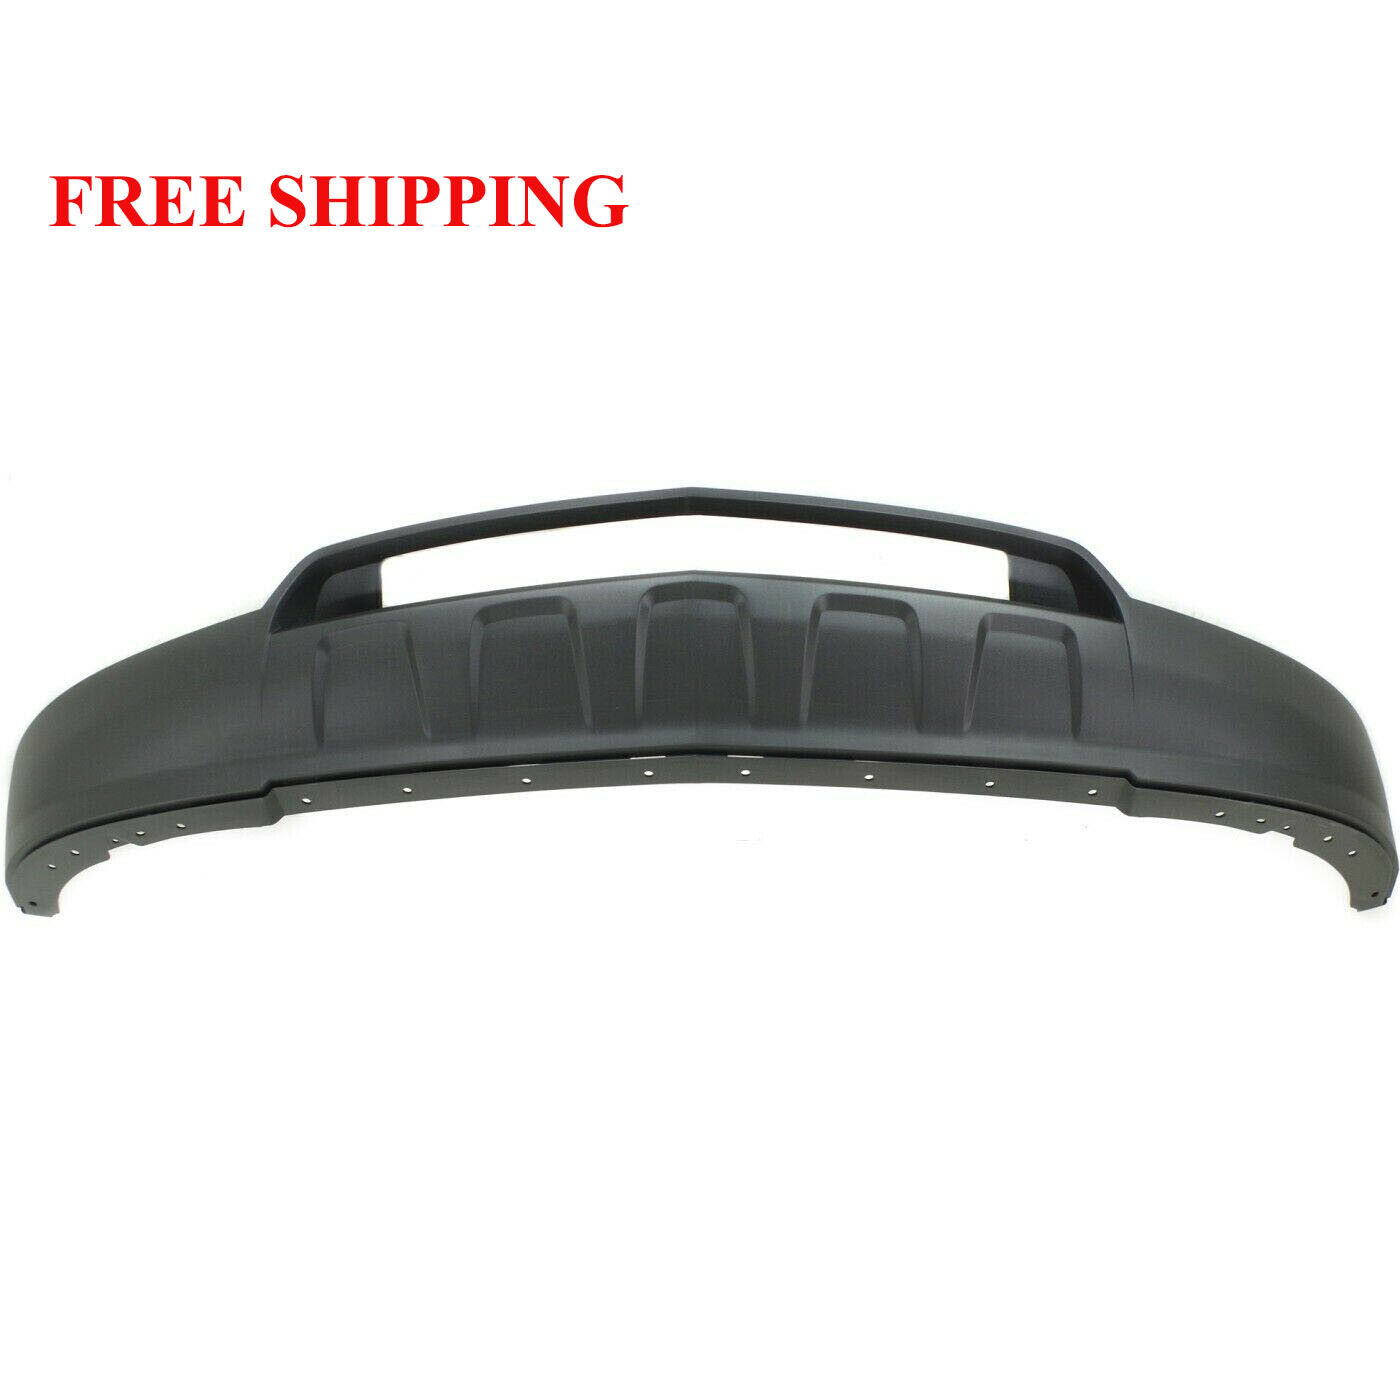 New Chevrolet Equinox Textured Front Bumper Lower Cover Fits 2012-2015 GM1015111